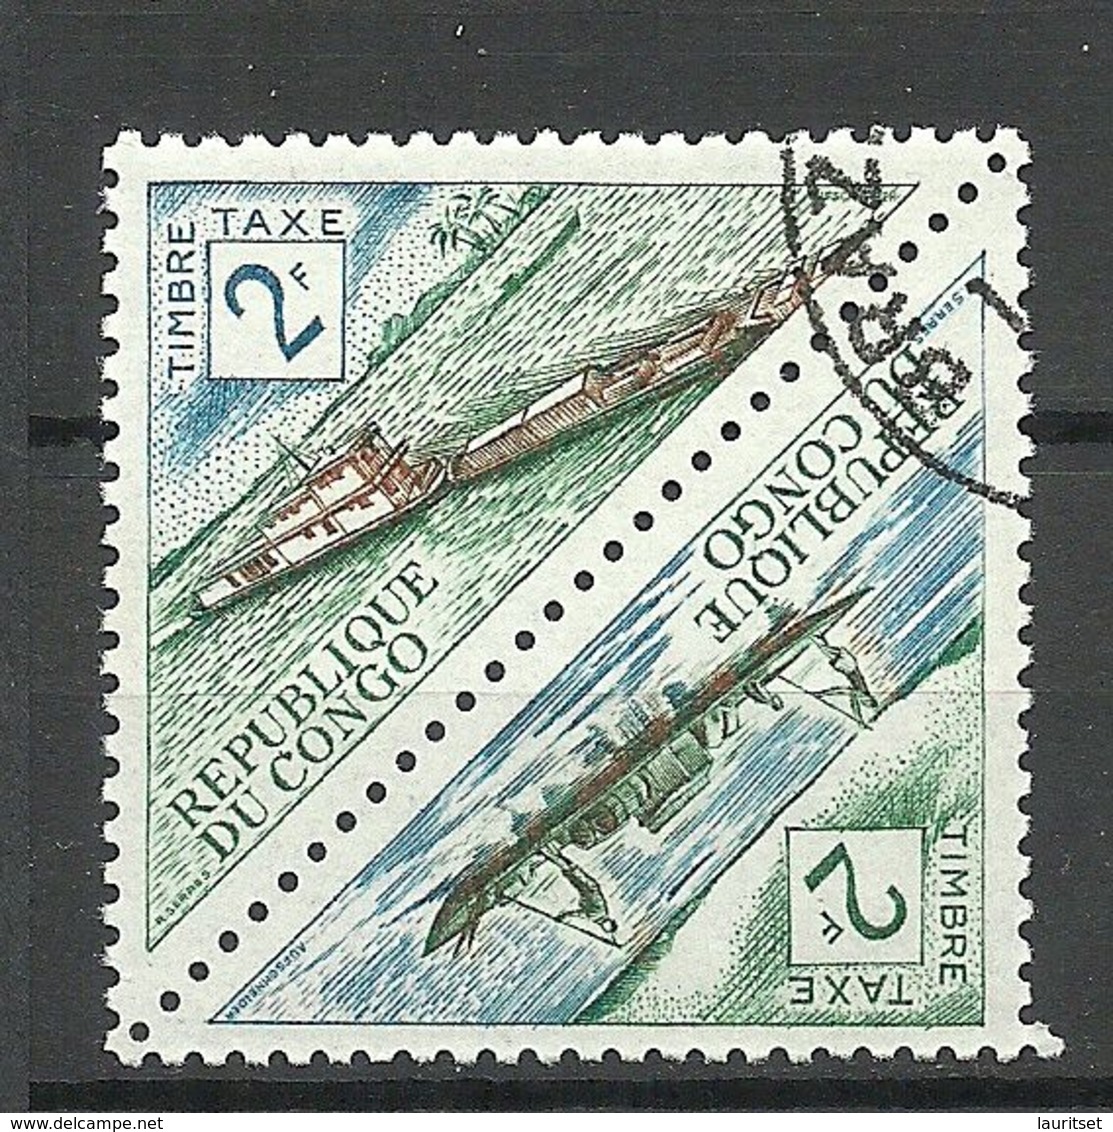 CONGO 1961 Michel 5 Postage Due Taxe Postage Due As Pair Boat Piroge O - Oblitérés